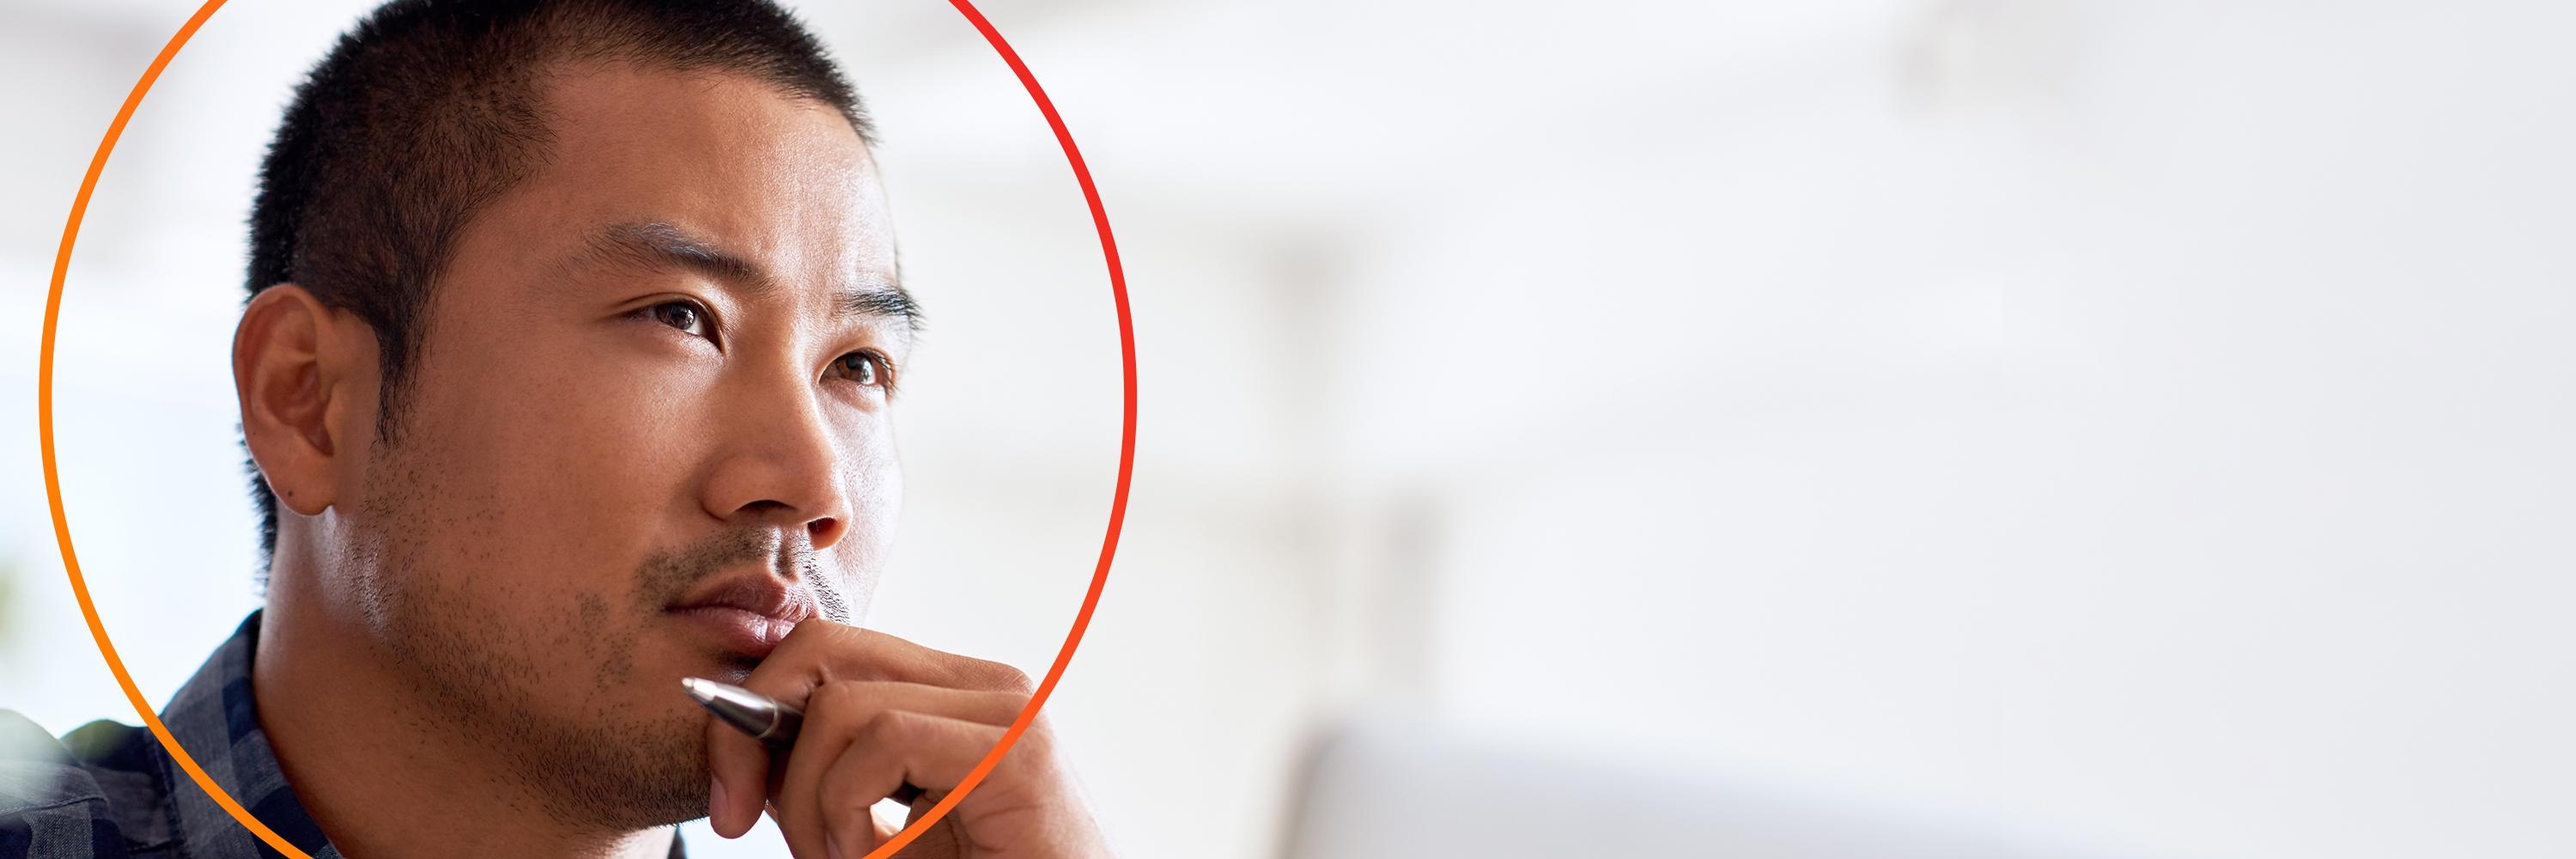 Asian male in thinking pose with orange circle, close up